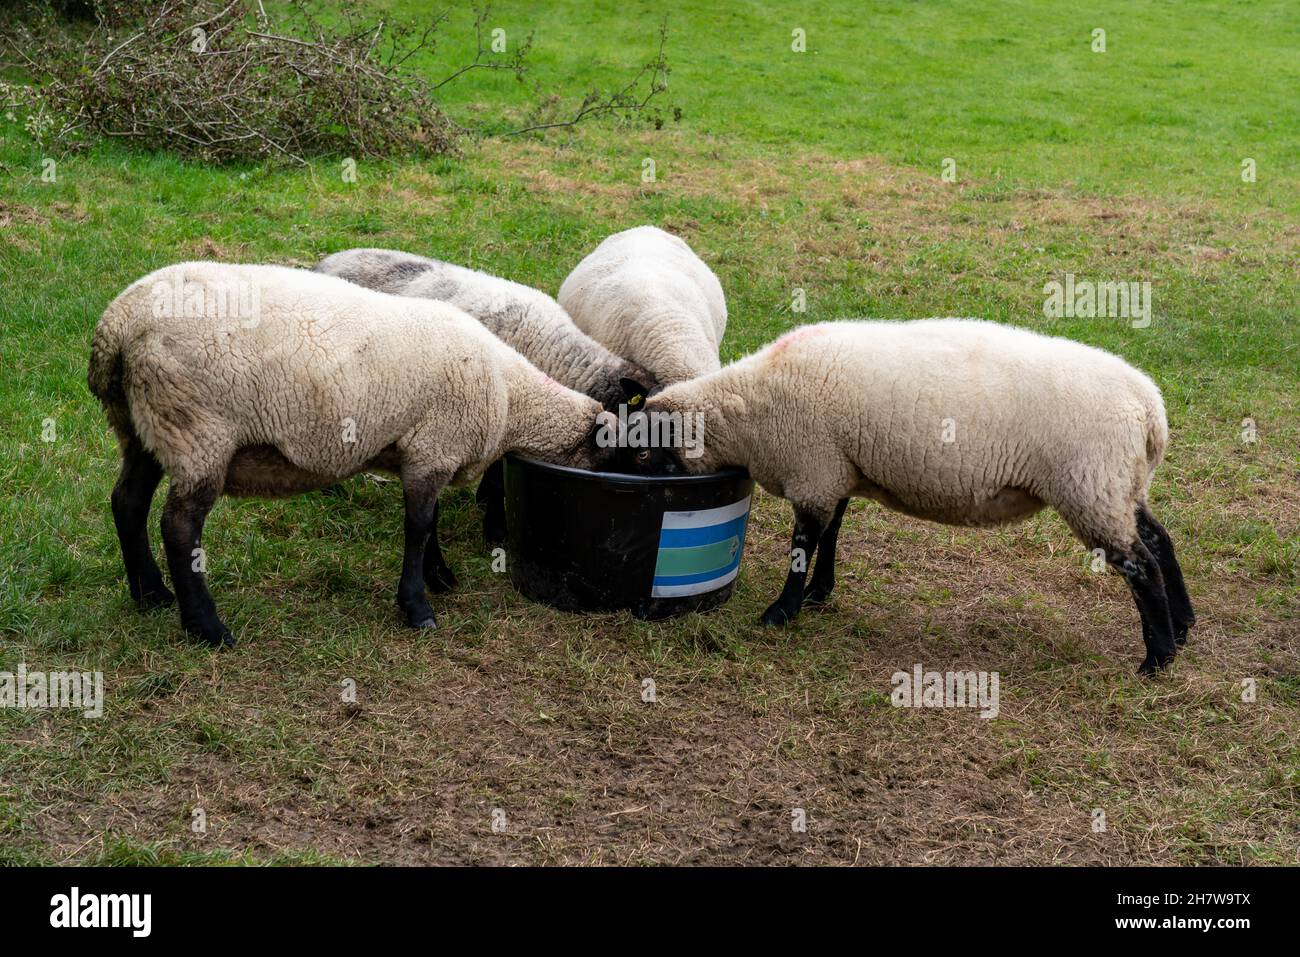 GREAT BOOKHAM, SURREY, UK - CIRCA 2021 OCTOBER: Sheep with blackheads and legs feeding on a tub on a sheep farm in the English countryside Stock Photo